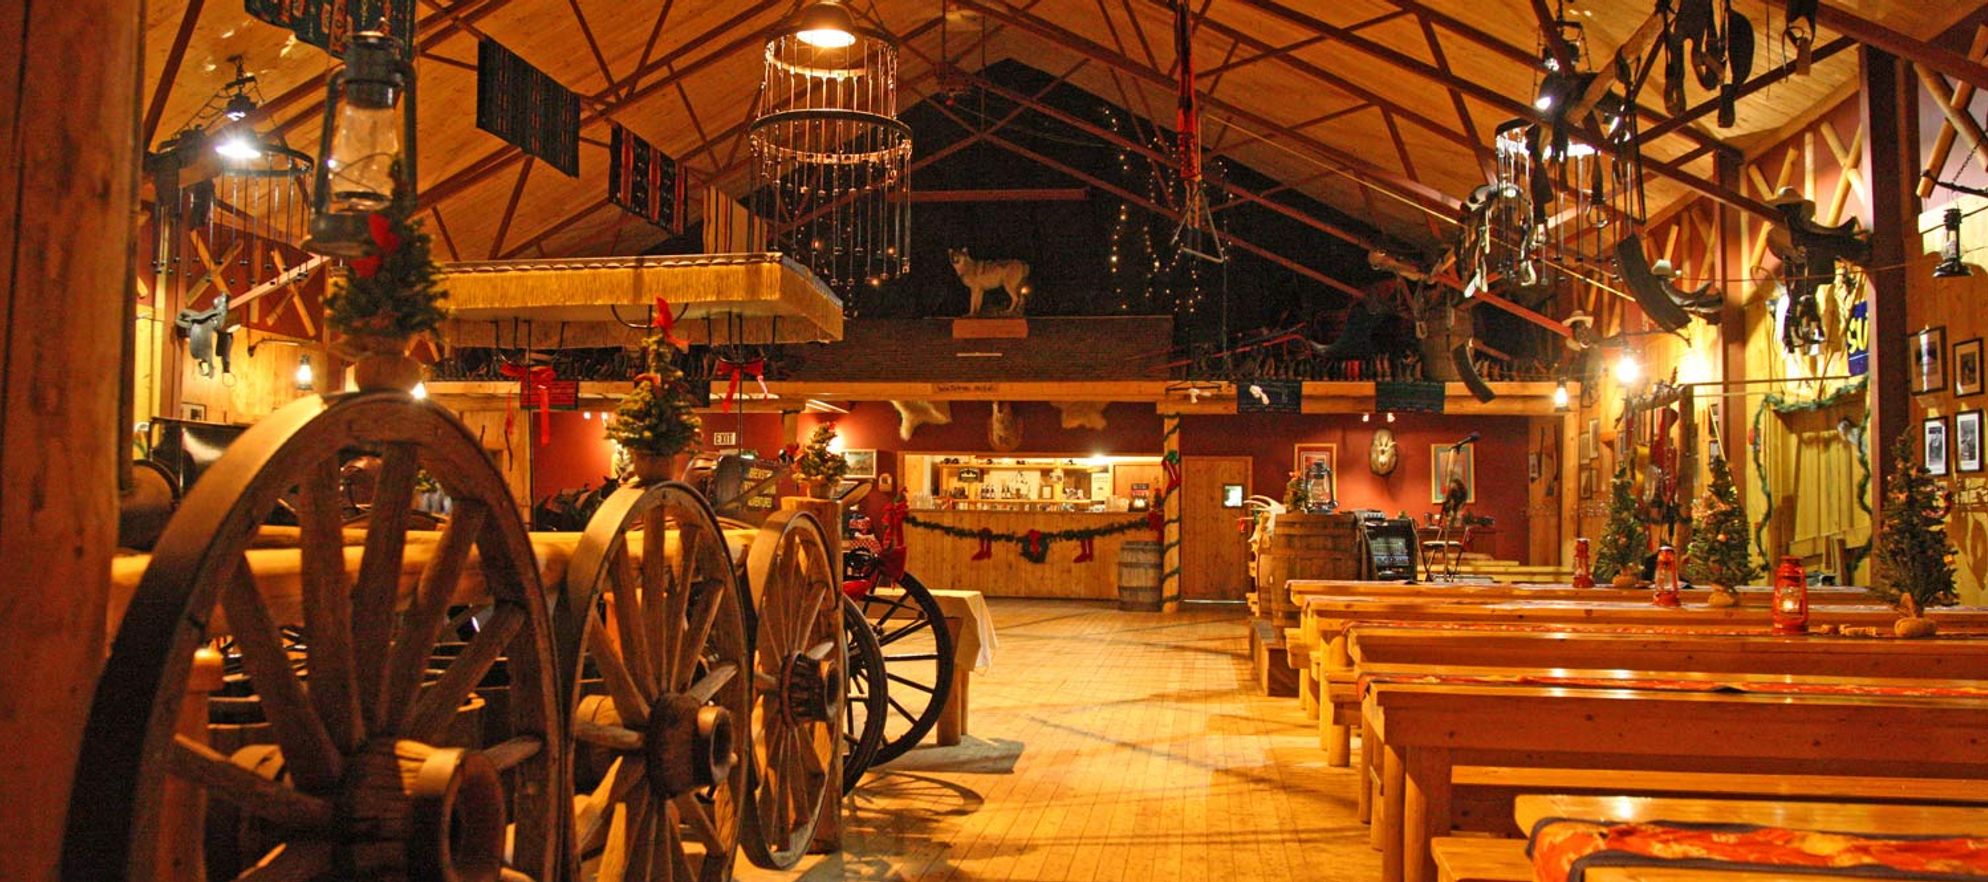 Brewster Cowboy's Barbeque & Dance Barn